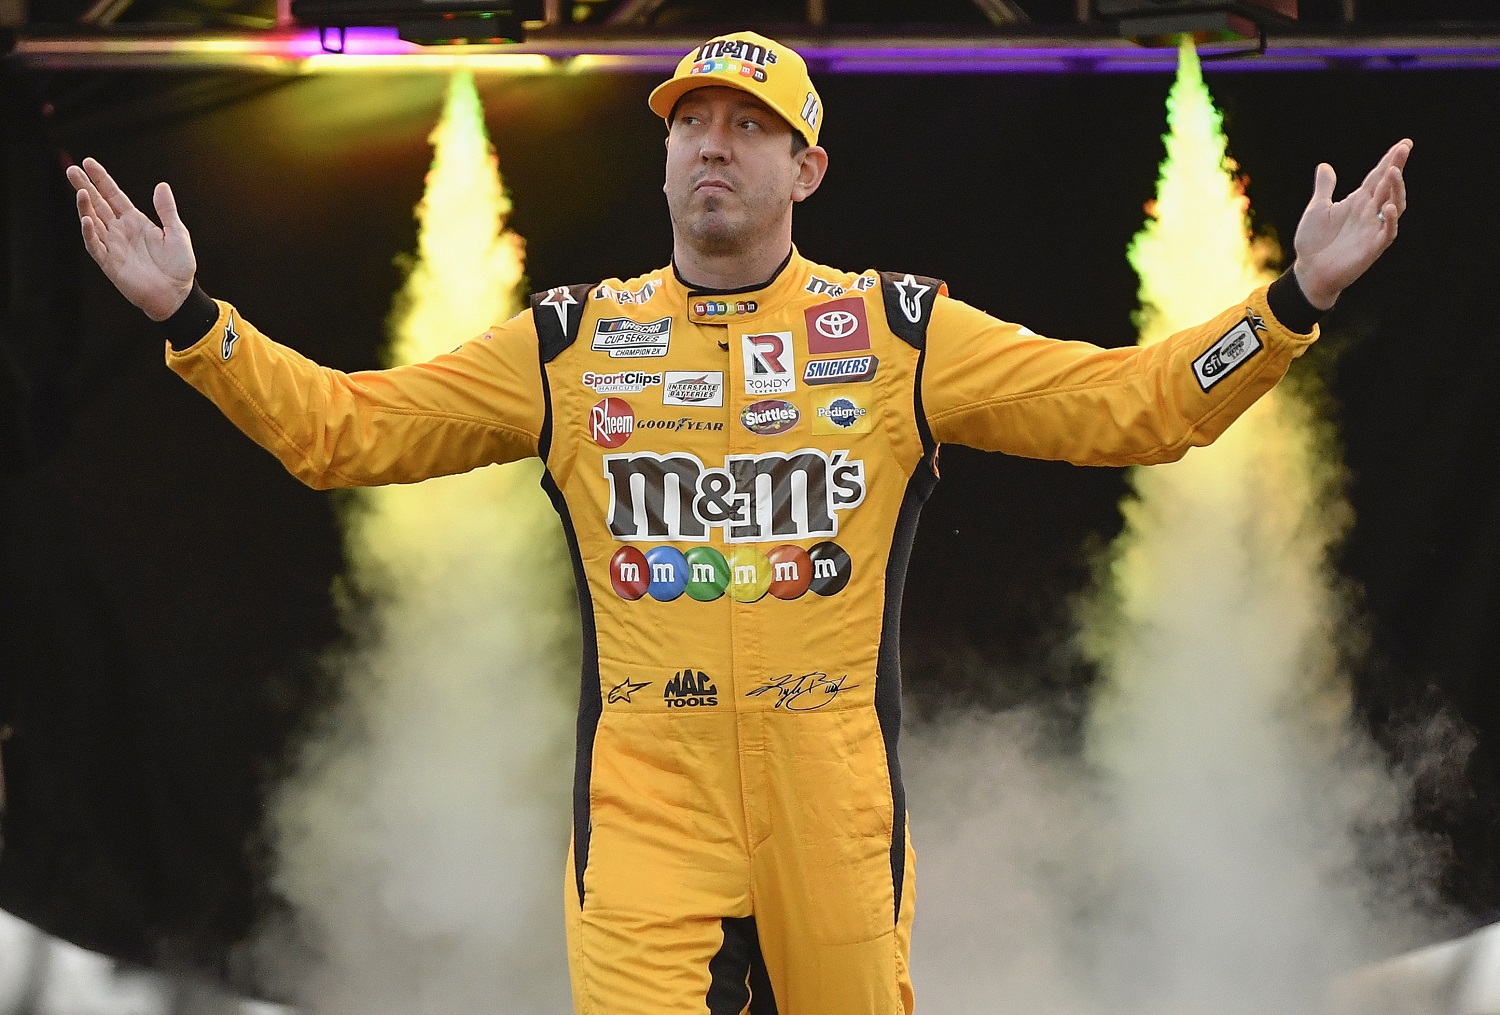 Kyle Busch walks onstage during driver intros prior to the NASCAR Cup Series Bass Pro Shops Night Race at Bristol Motor Speedway on Sept. 17, 2022.